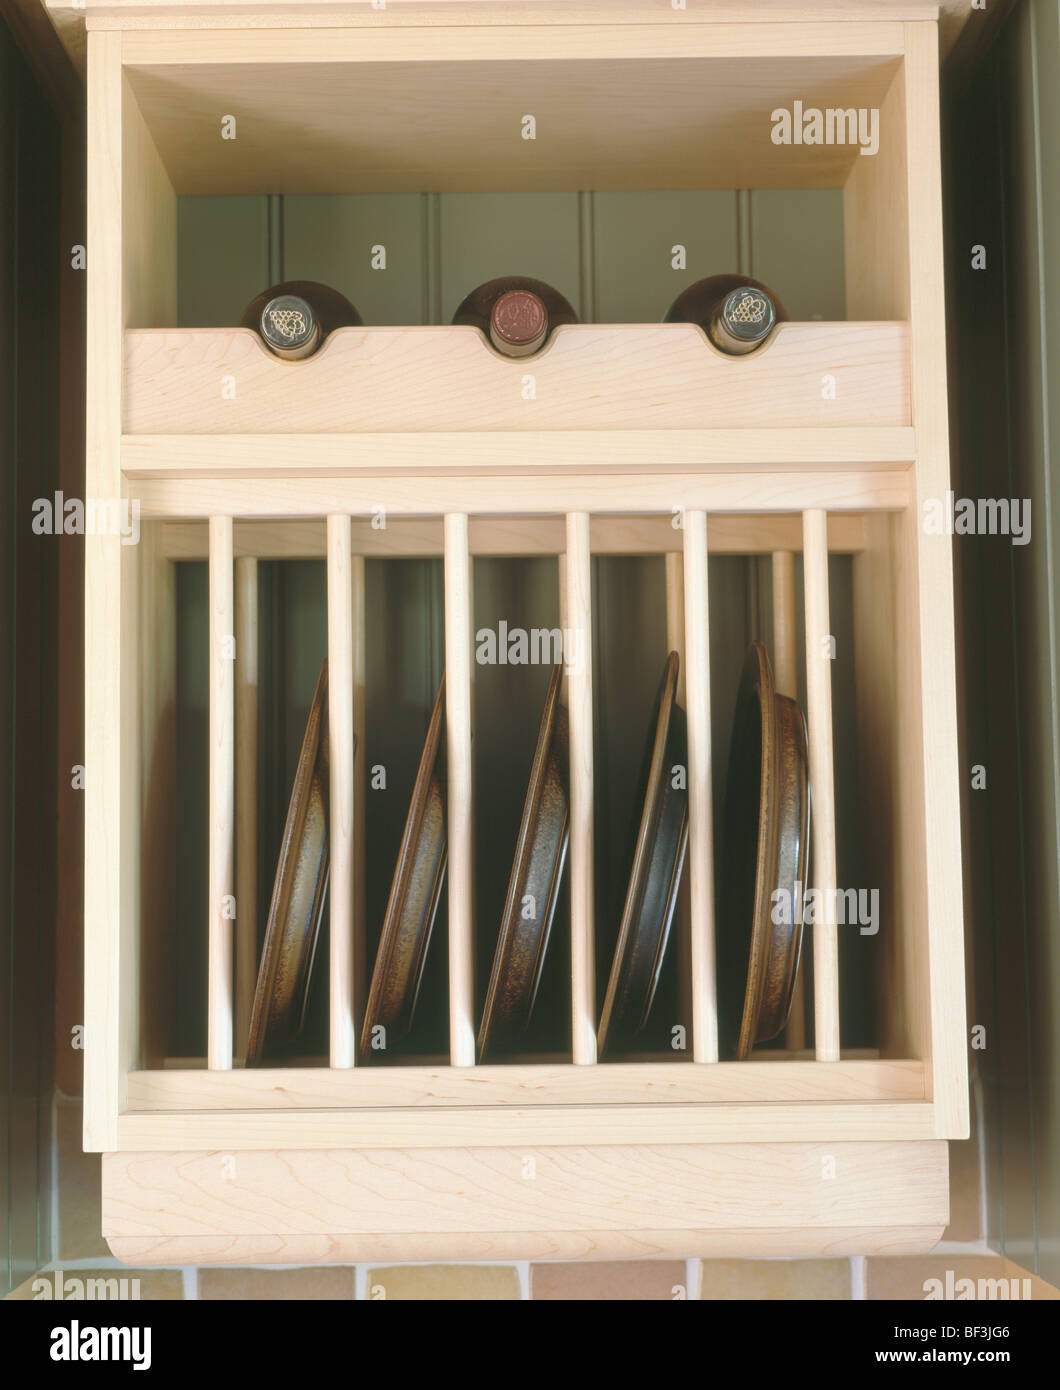 https://c8.alamy.com/comp/BF3JG6/close-up-of-plate-rack-and-wine-storage-in-pale-wood-kitchen-unit-BF3JG6.jpg